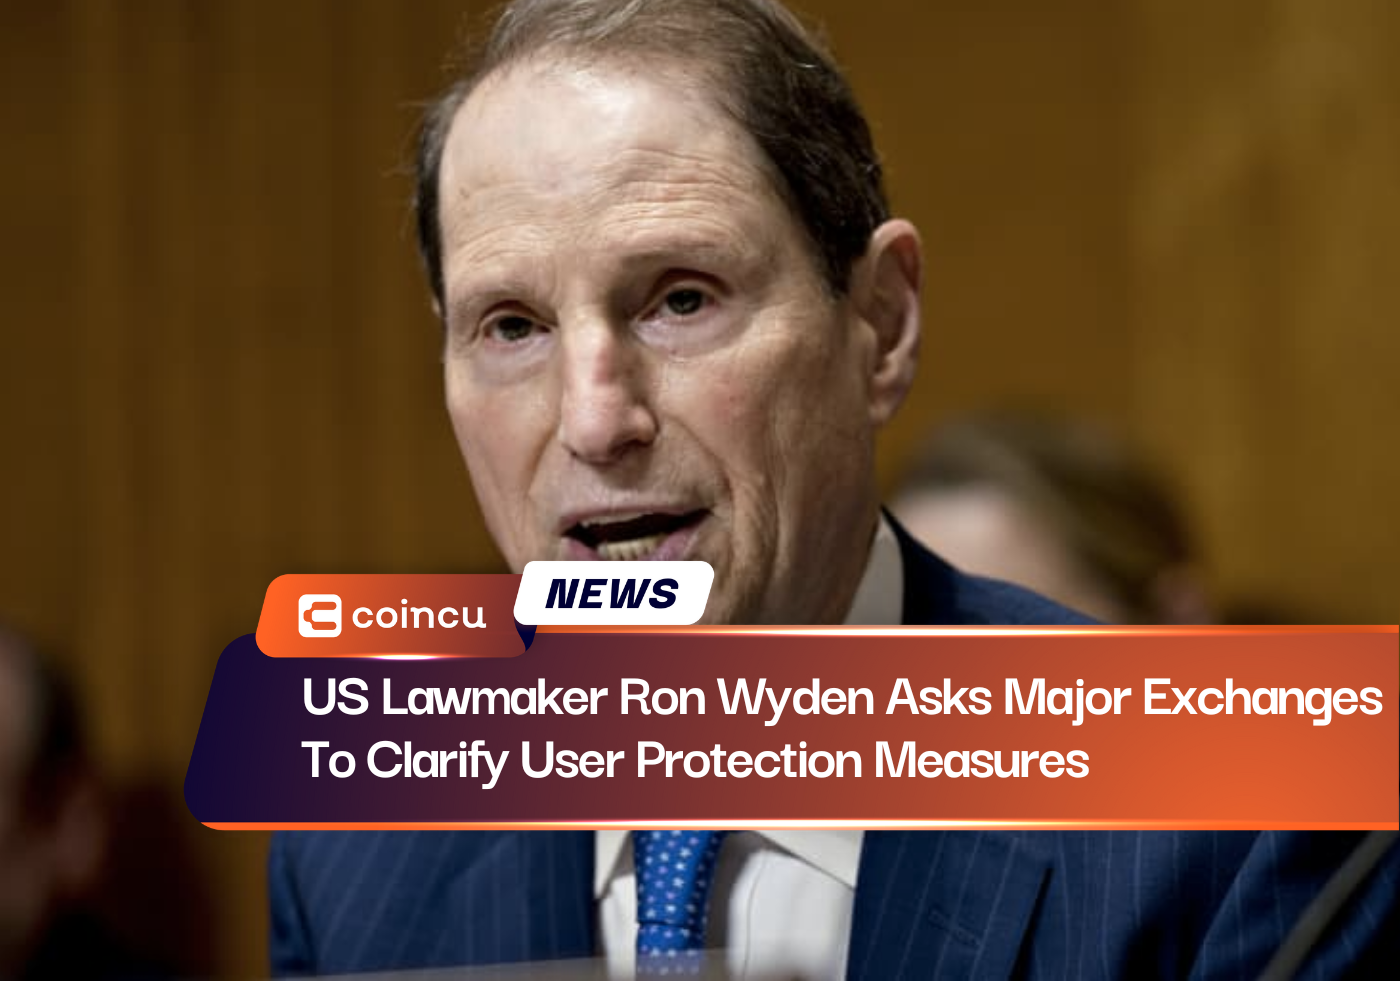 US Lawmaker Ron Wyden Asks Major Exchanges To Clarify User Protection Measures